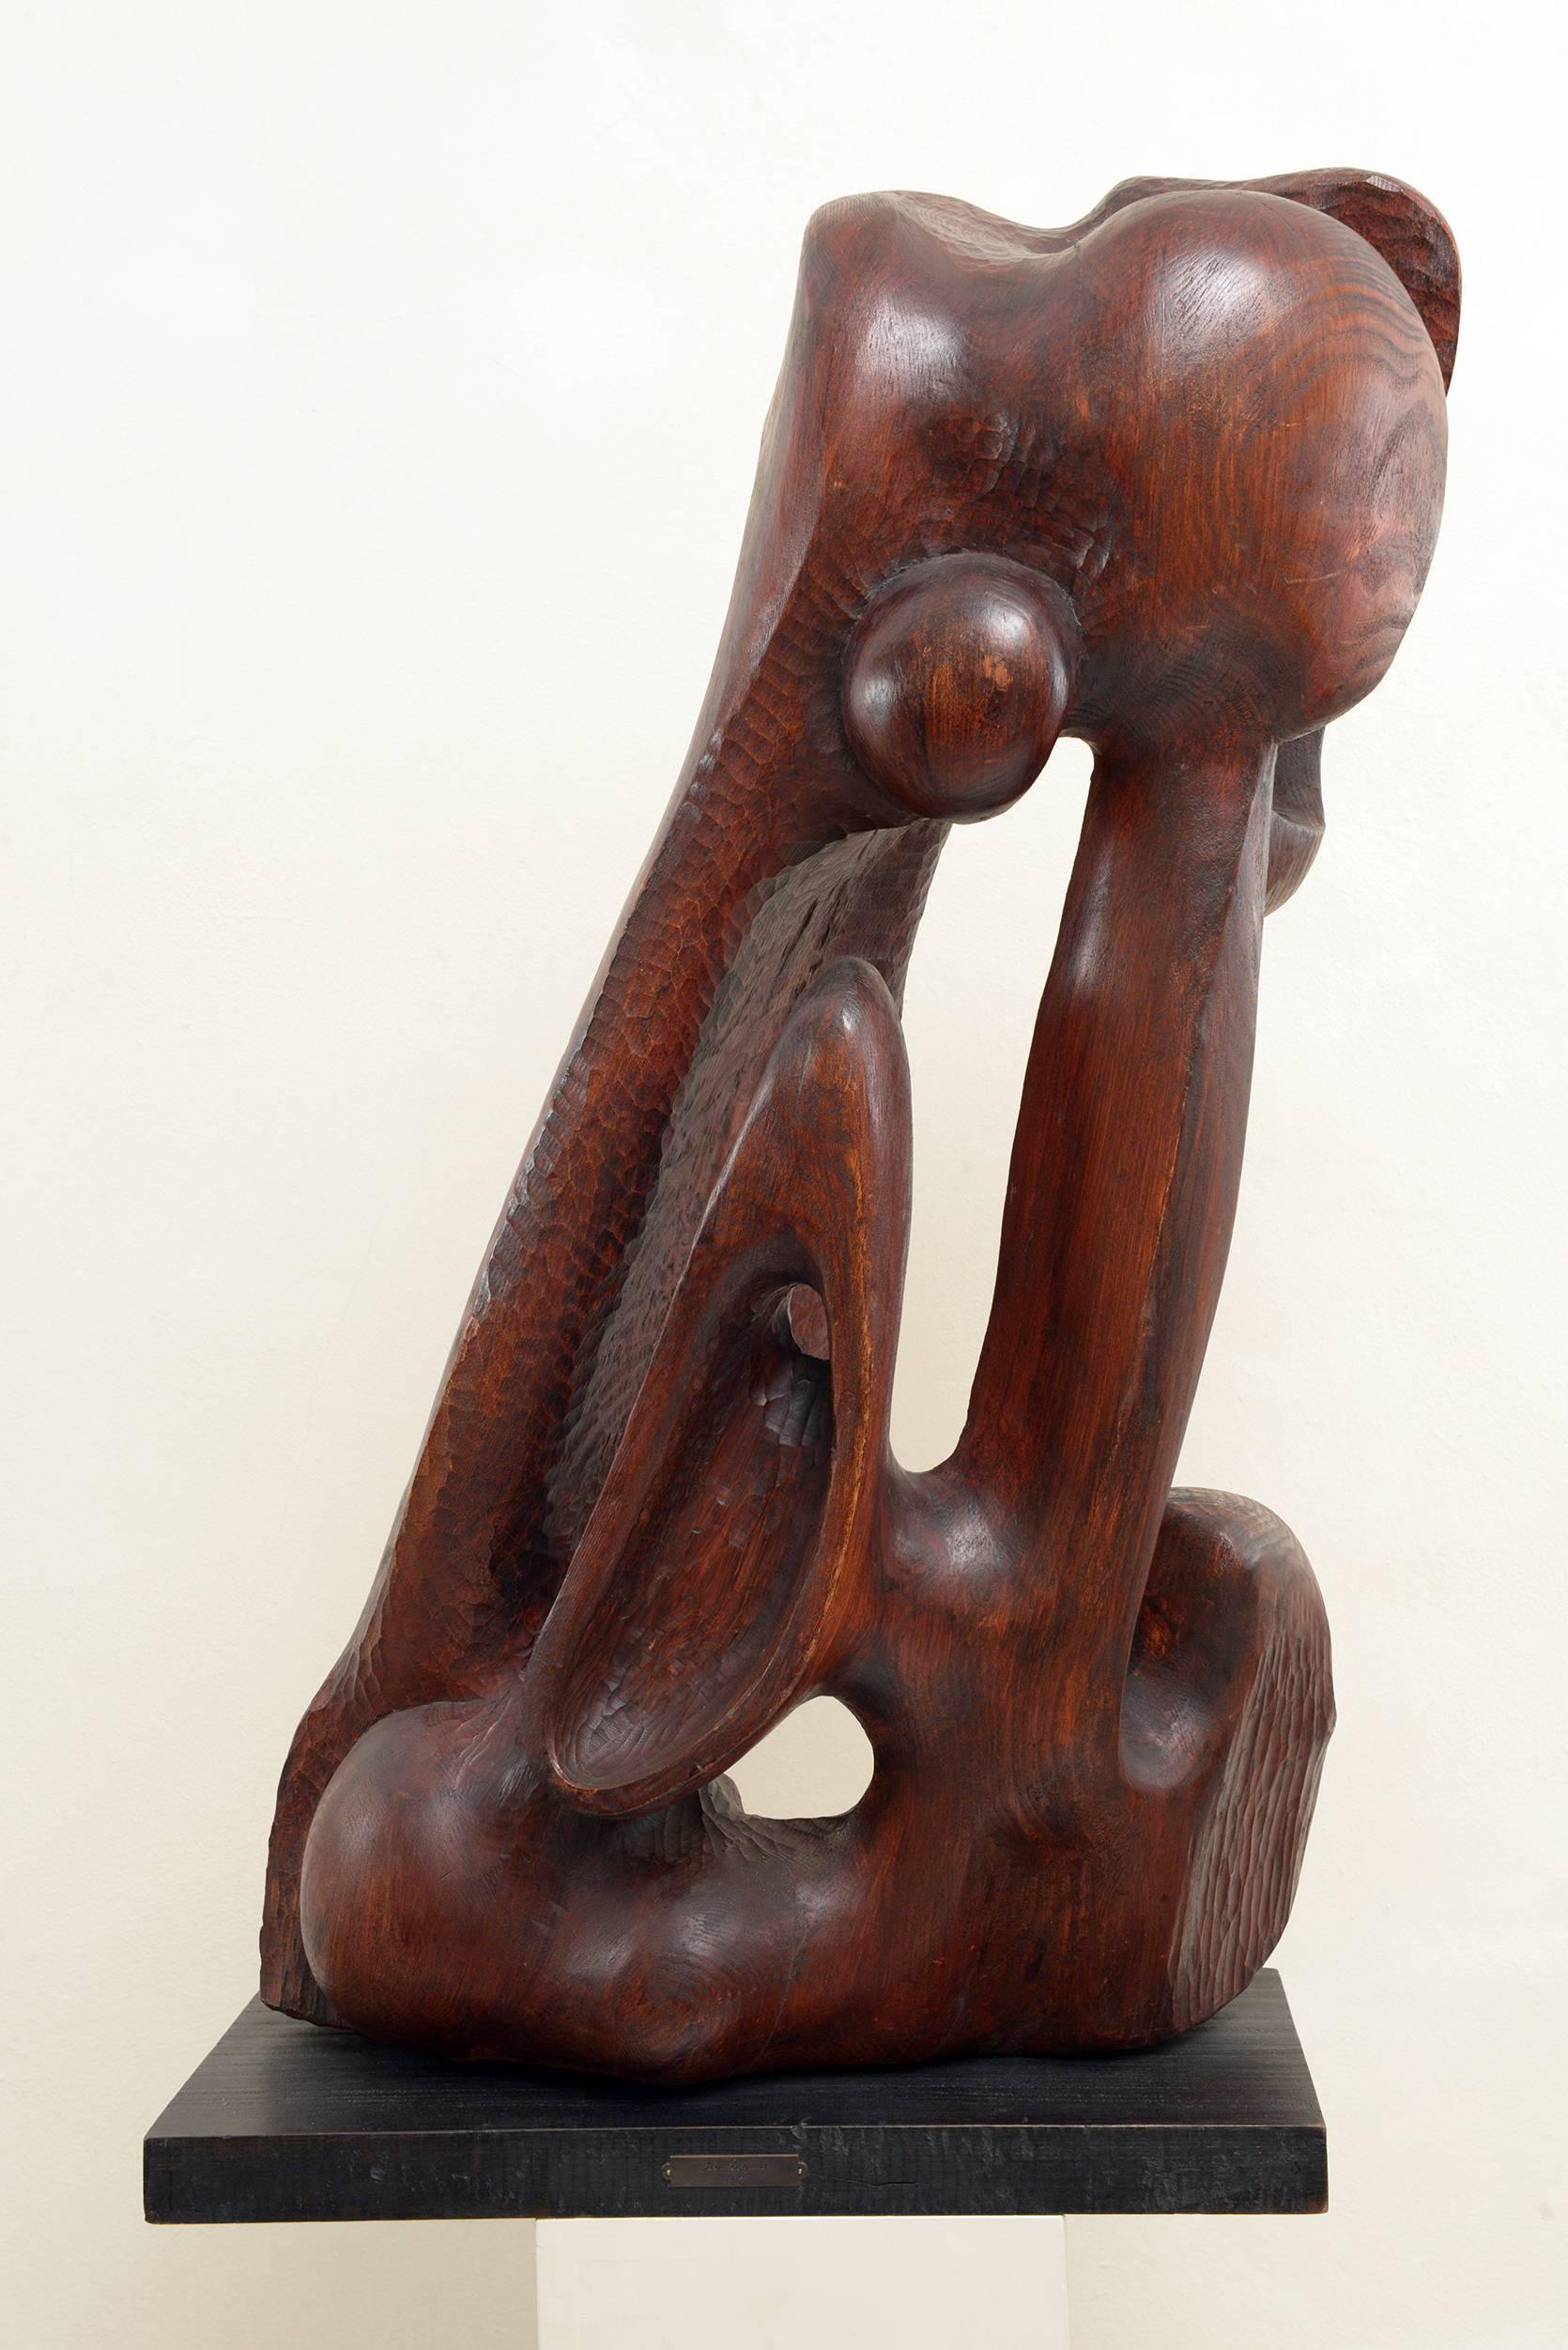 Solid big piece of wood sculptured, abstract subject, wood base to. Signed and dated 1967.